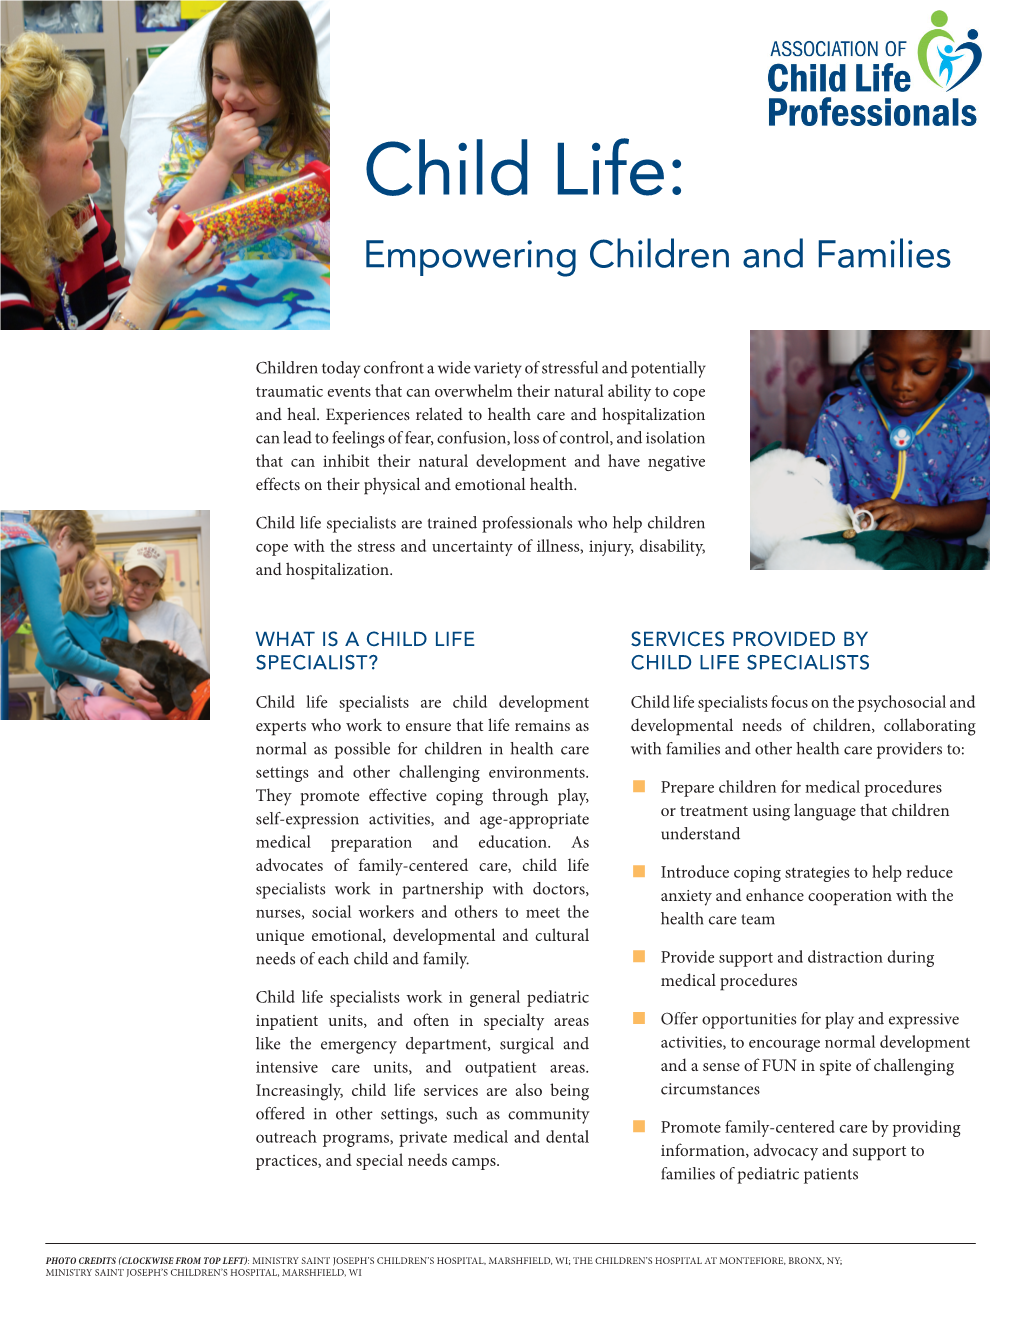 Child Life: Empowering Children and Families